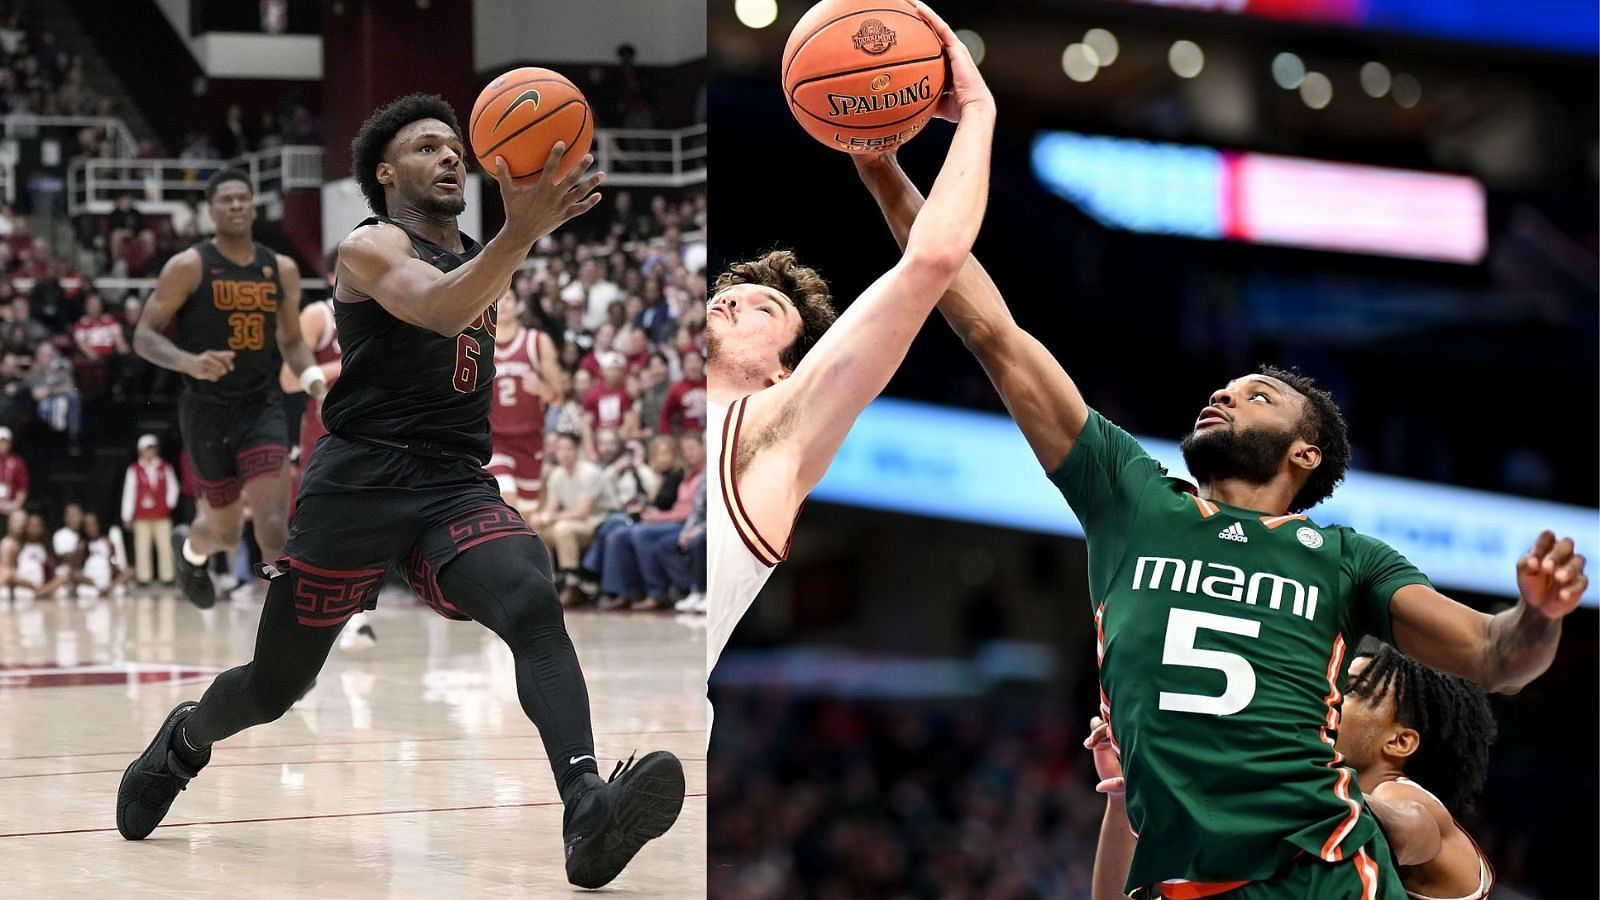 USC and Miami endured disappointing college basketball seasons that did not live up to preseason hype.